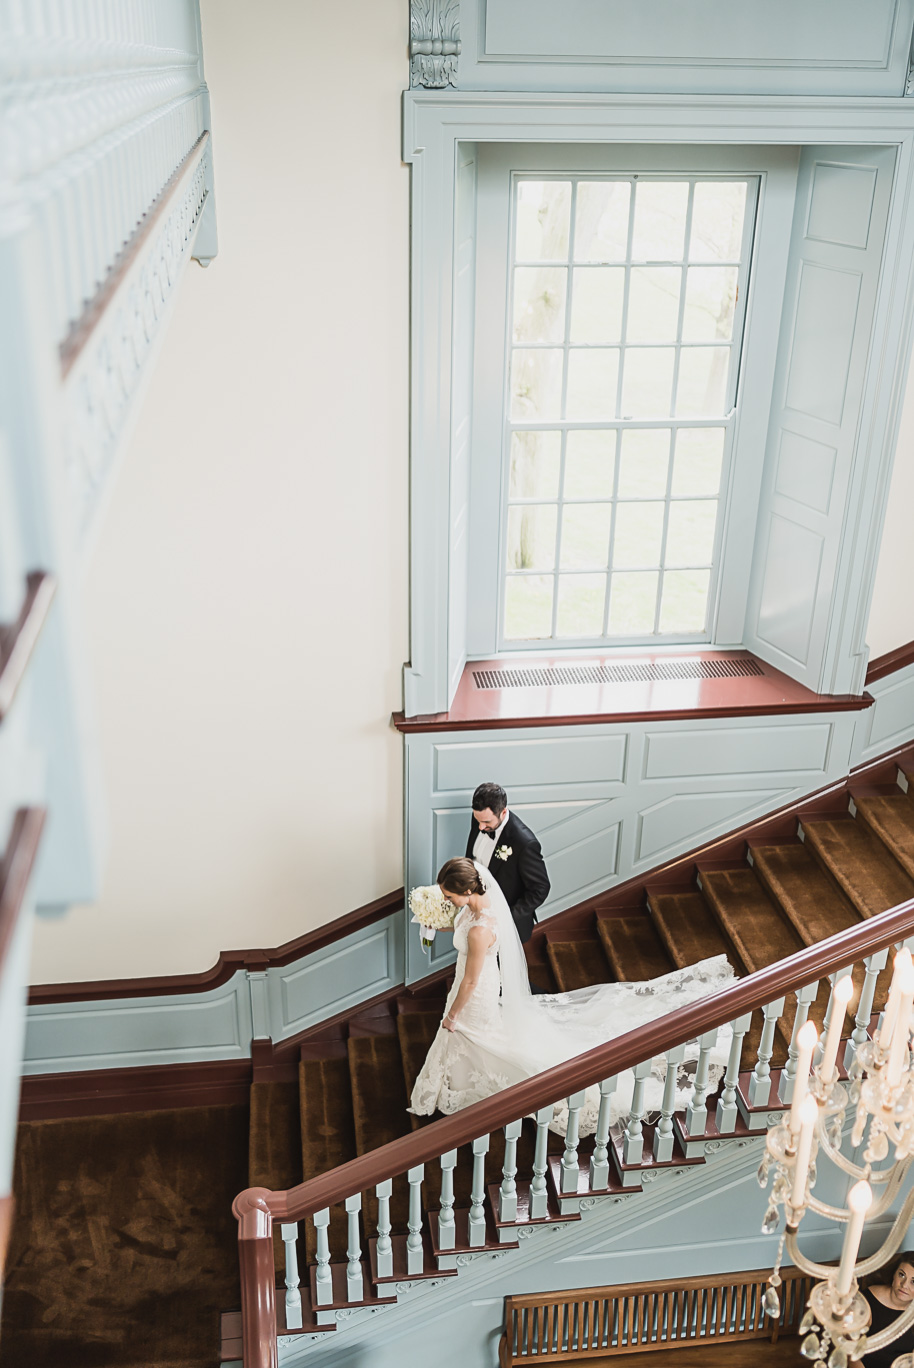 A classic Jewish wedding at Lovett Hall and Greenfield Village in Dearborn, Michigan provided by Kari Dawson, top-rated Detroit wedding photographer, and her team.